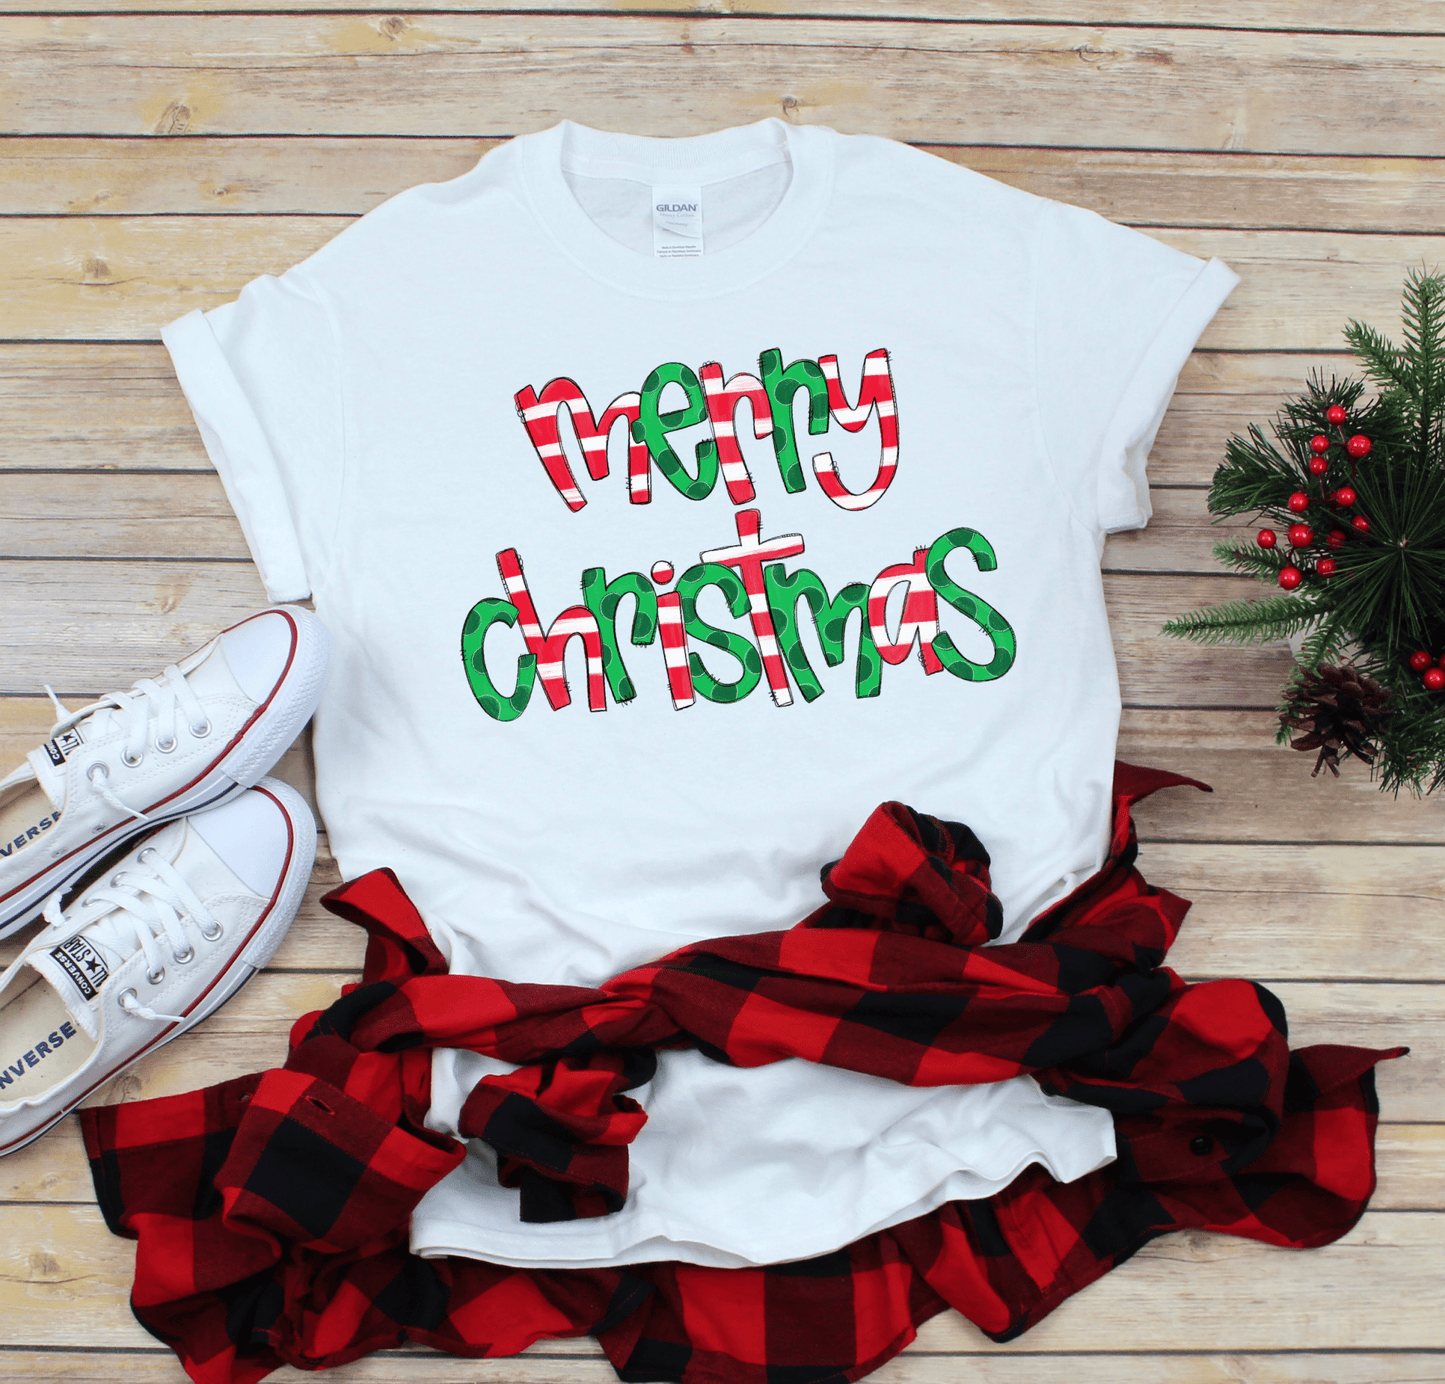 Merry Christmas red and green stripe polka dot Christmas DTF TRANSFERPRINT TO ORDER - Do it yourself Transfers